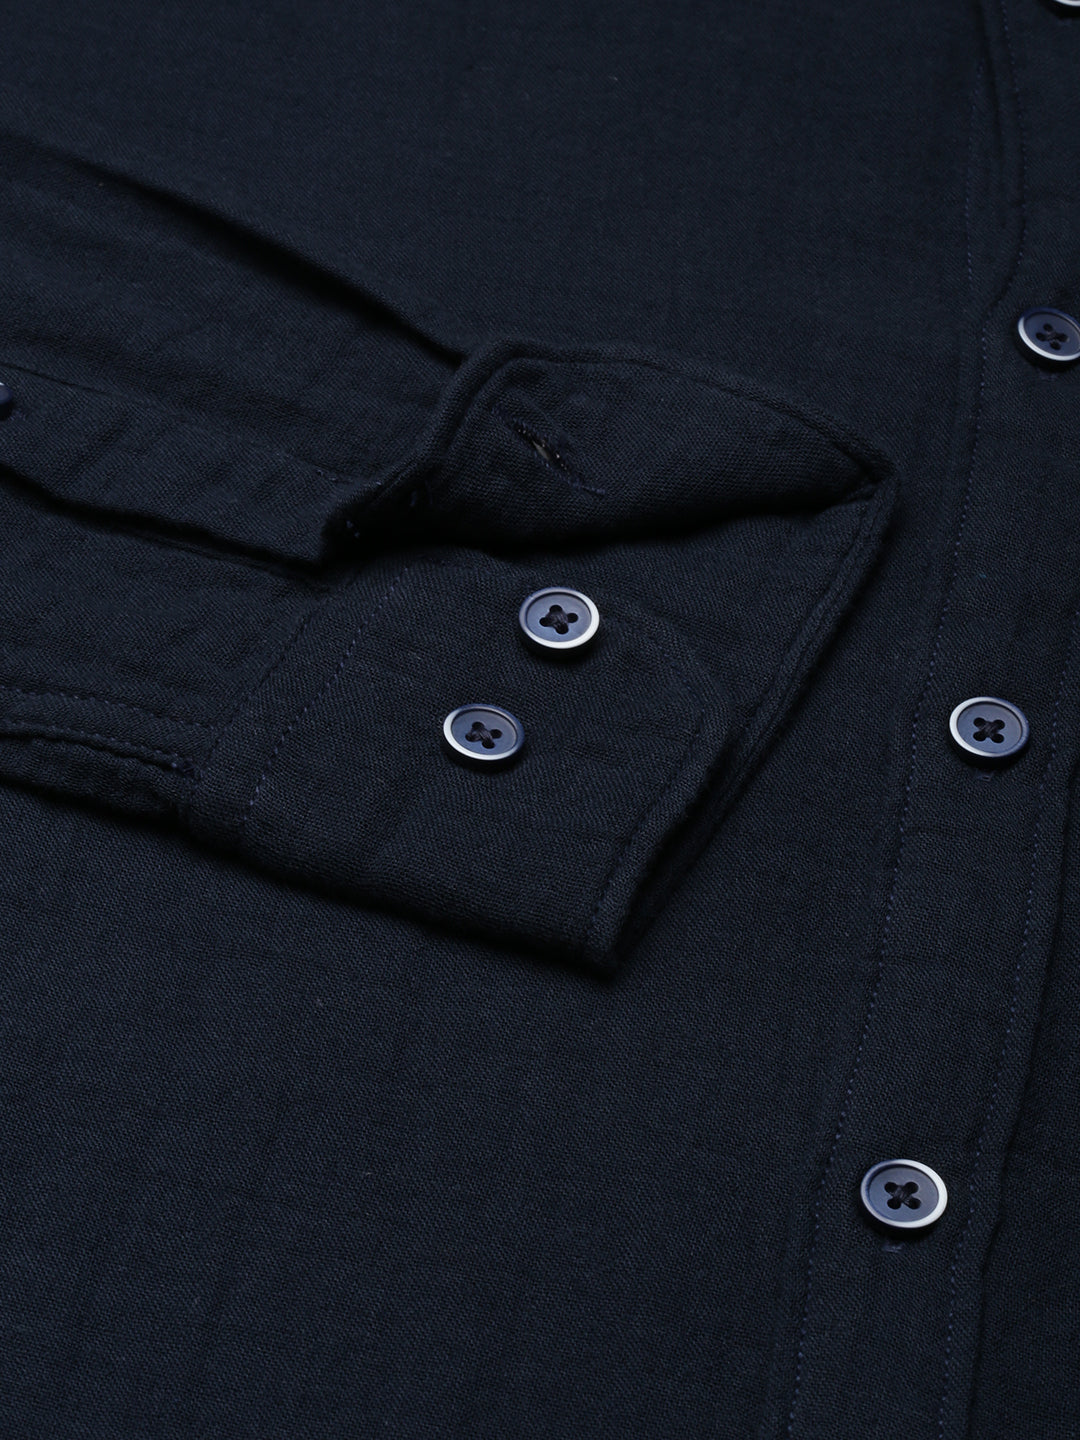 Solid Navy Button Down Shirt